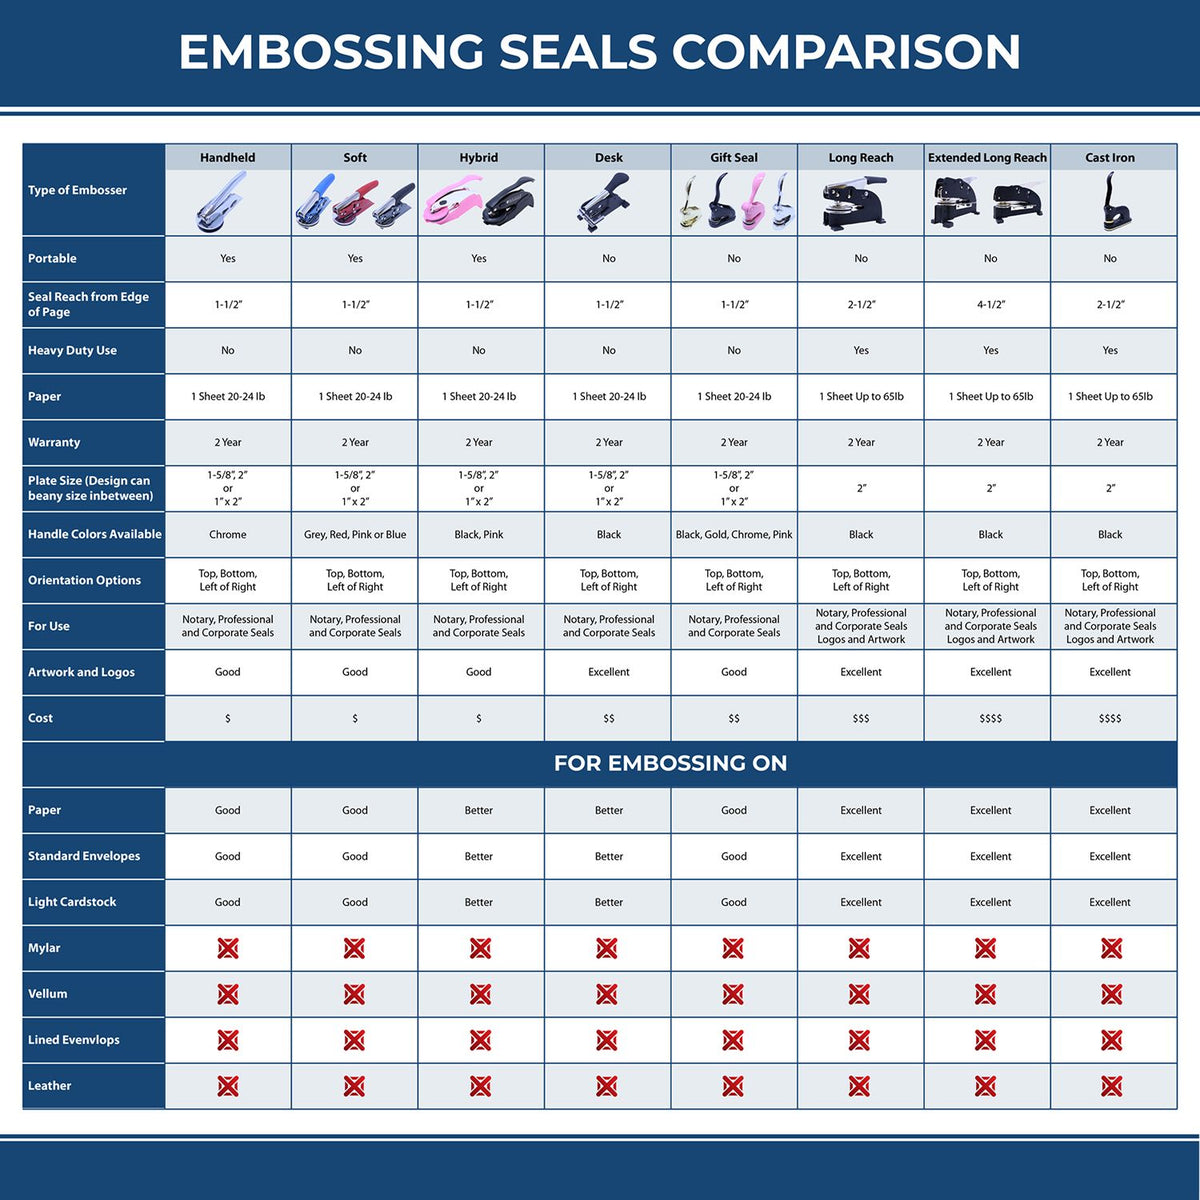 A comparison chart for the different types of mount models available for the Soft Pocket Montana Landscape Architect Embosser.